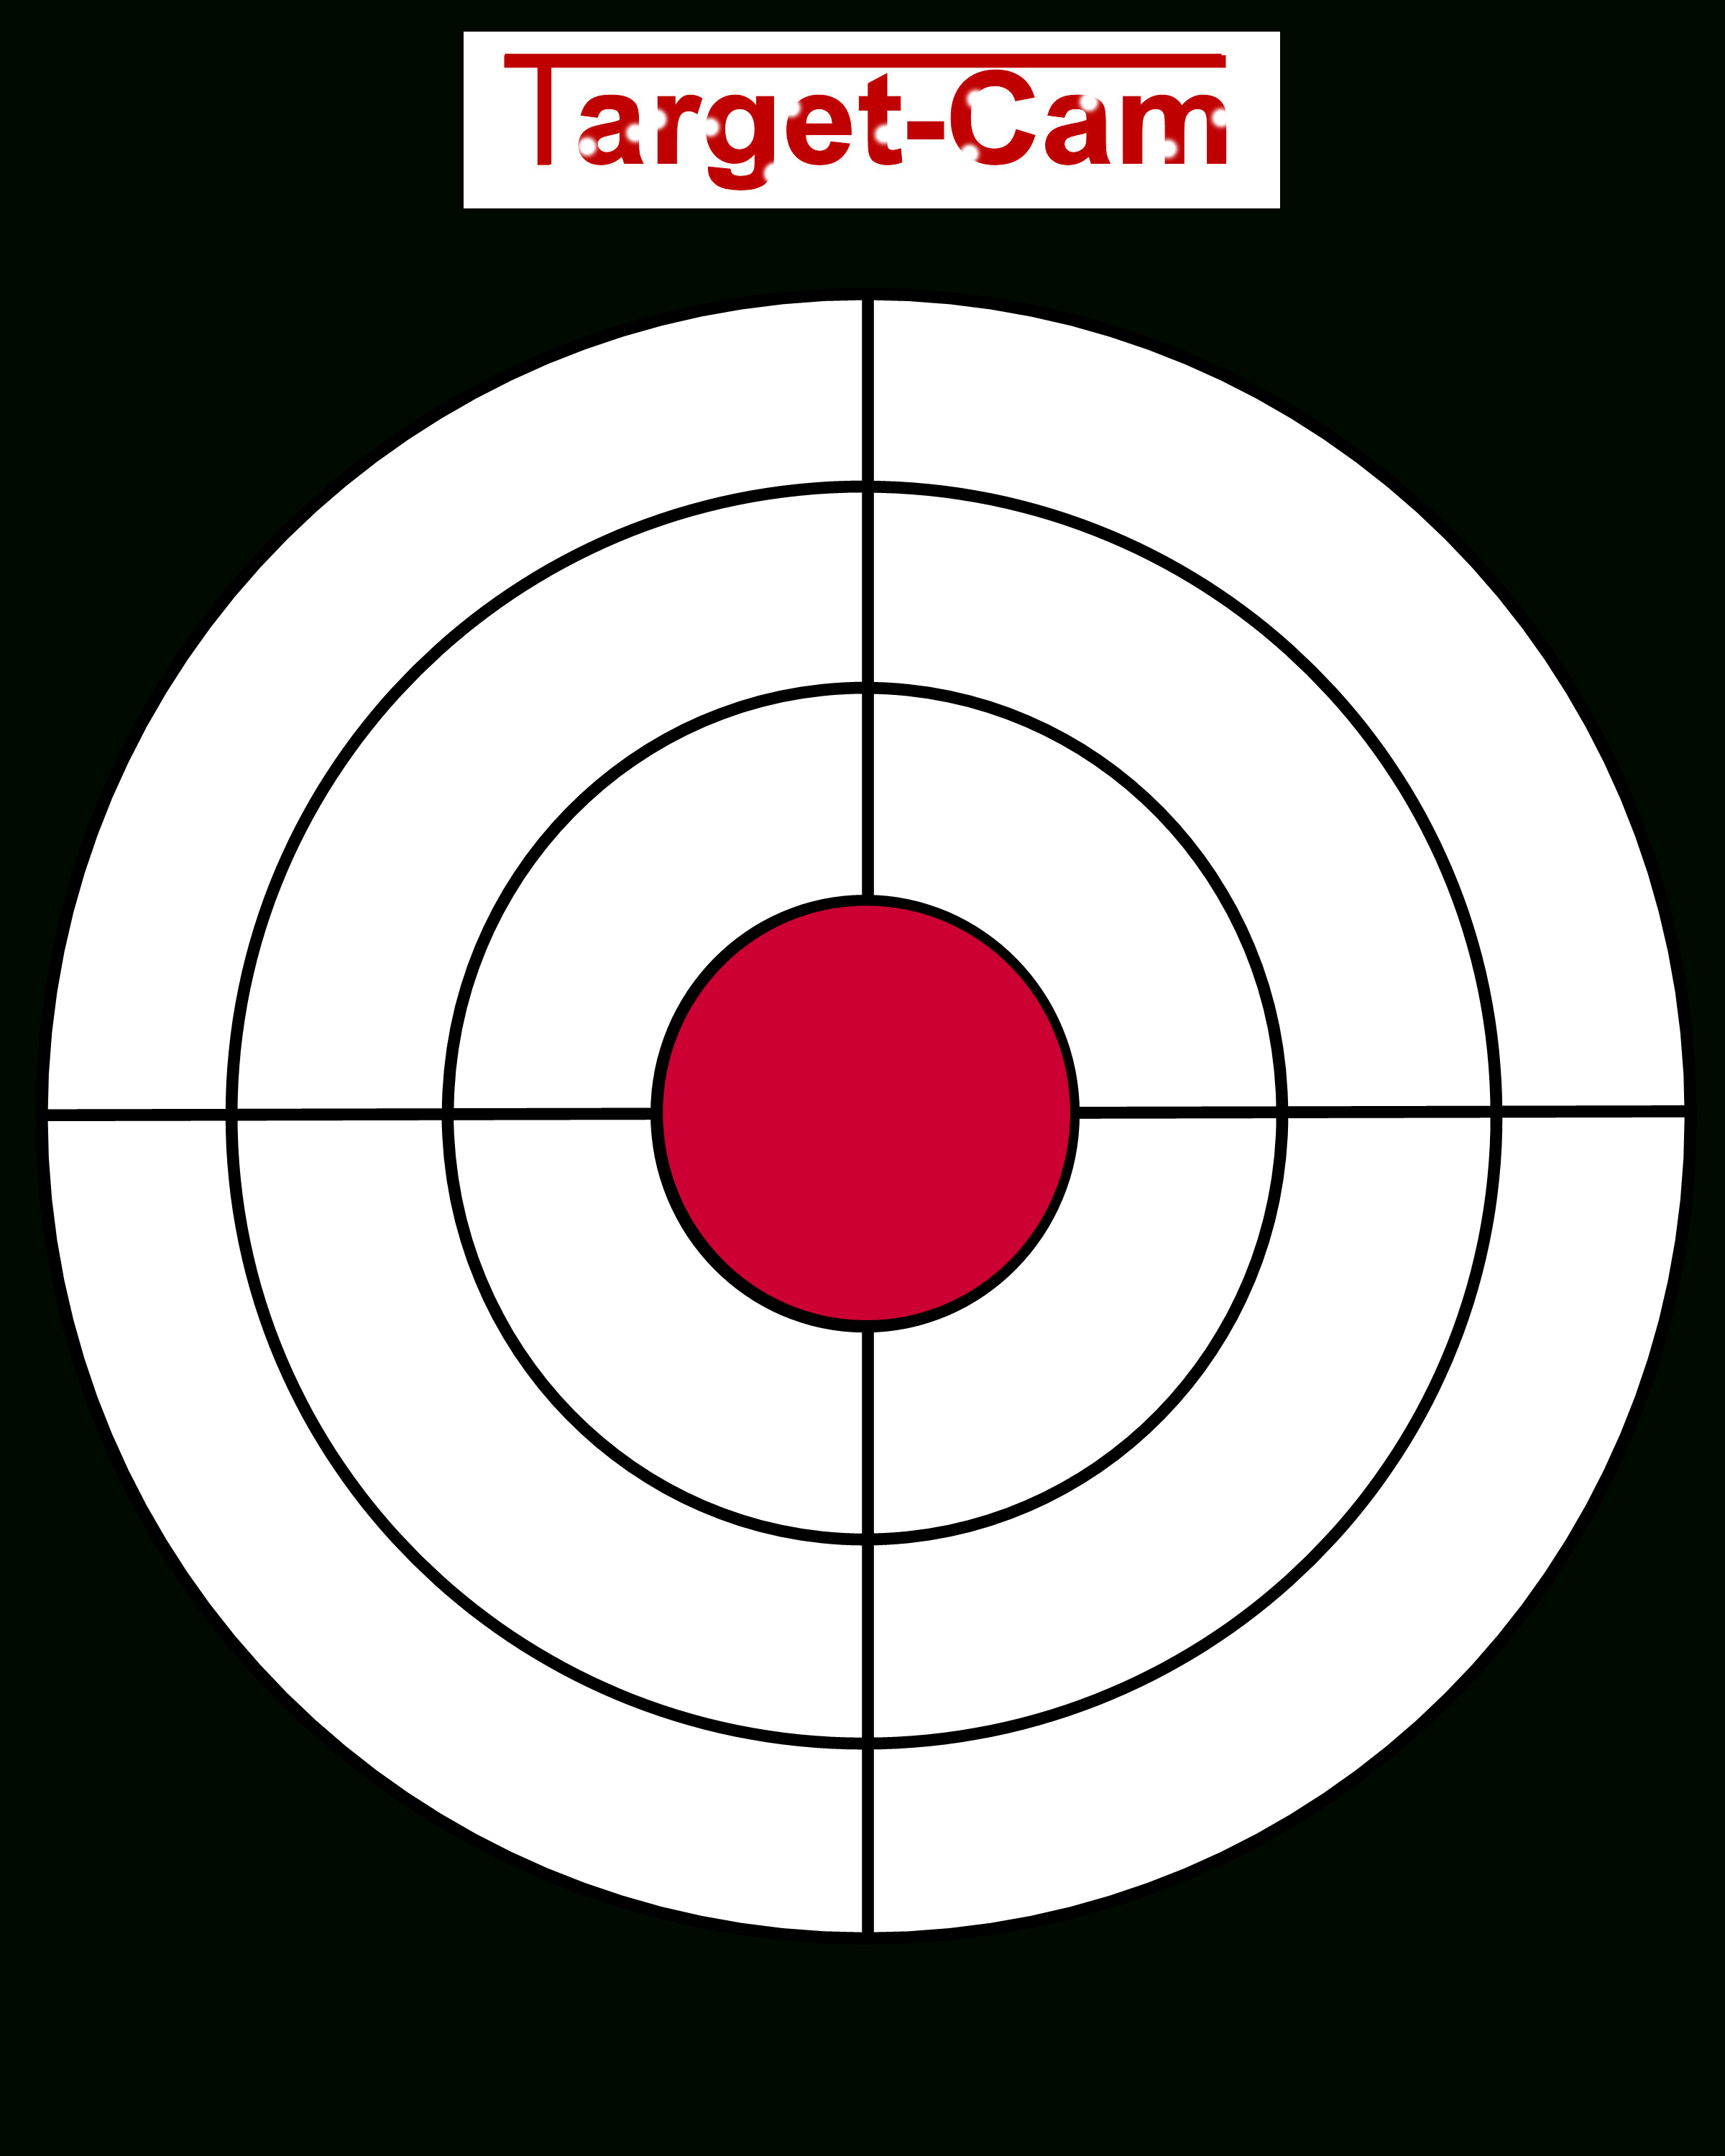 Free Gun Targets To Print | New &amp;quot;target-Cam&amp;quot; Rifle And Hand Gun - Free Printable Targets